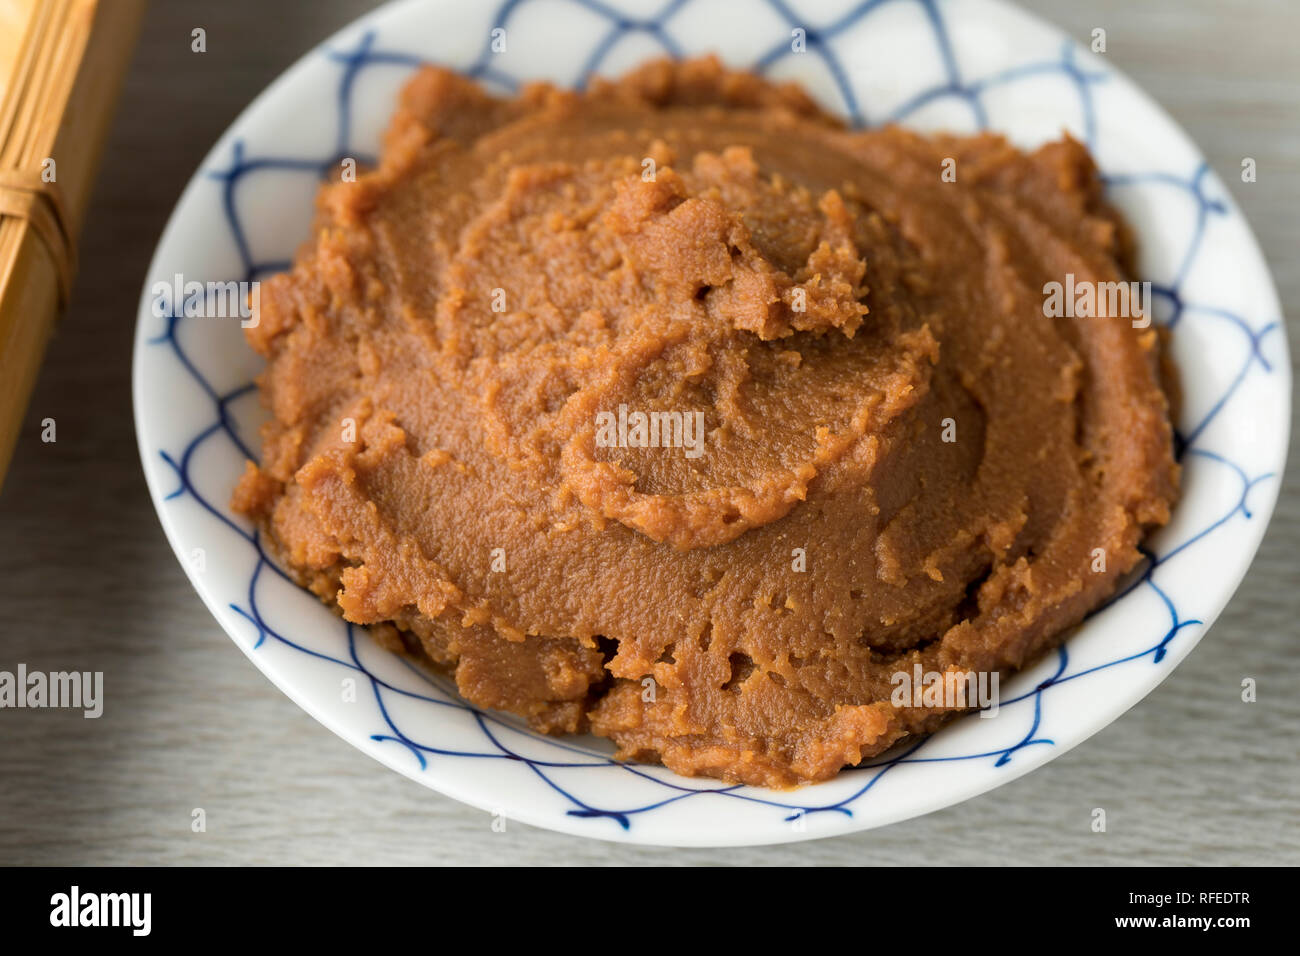 Bowl with Japanese miso paste as an ingredient close up Stock Photo